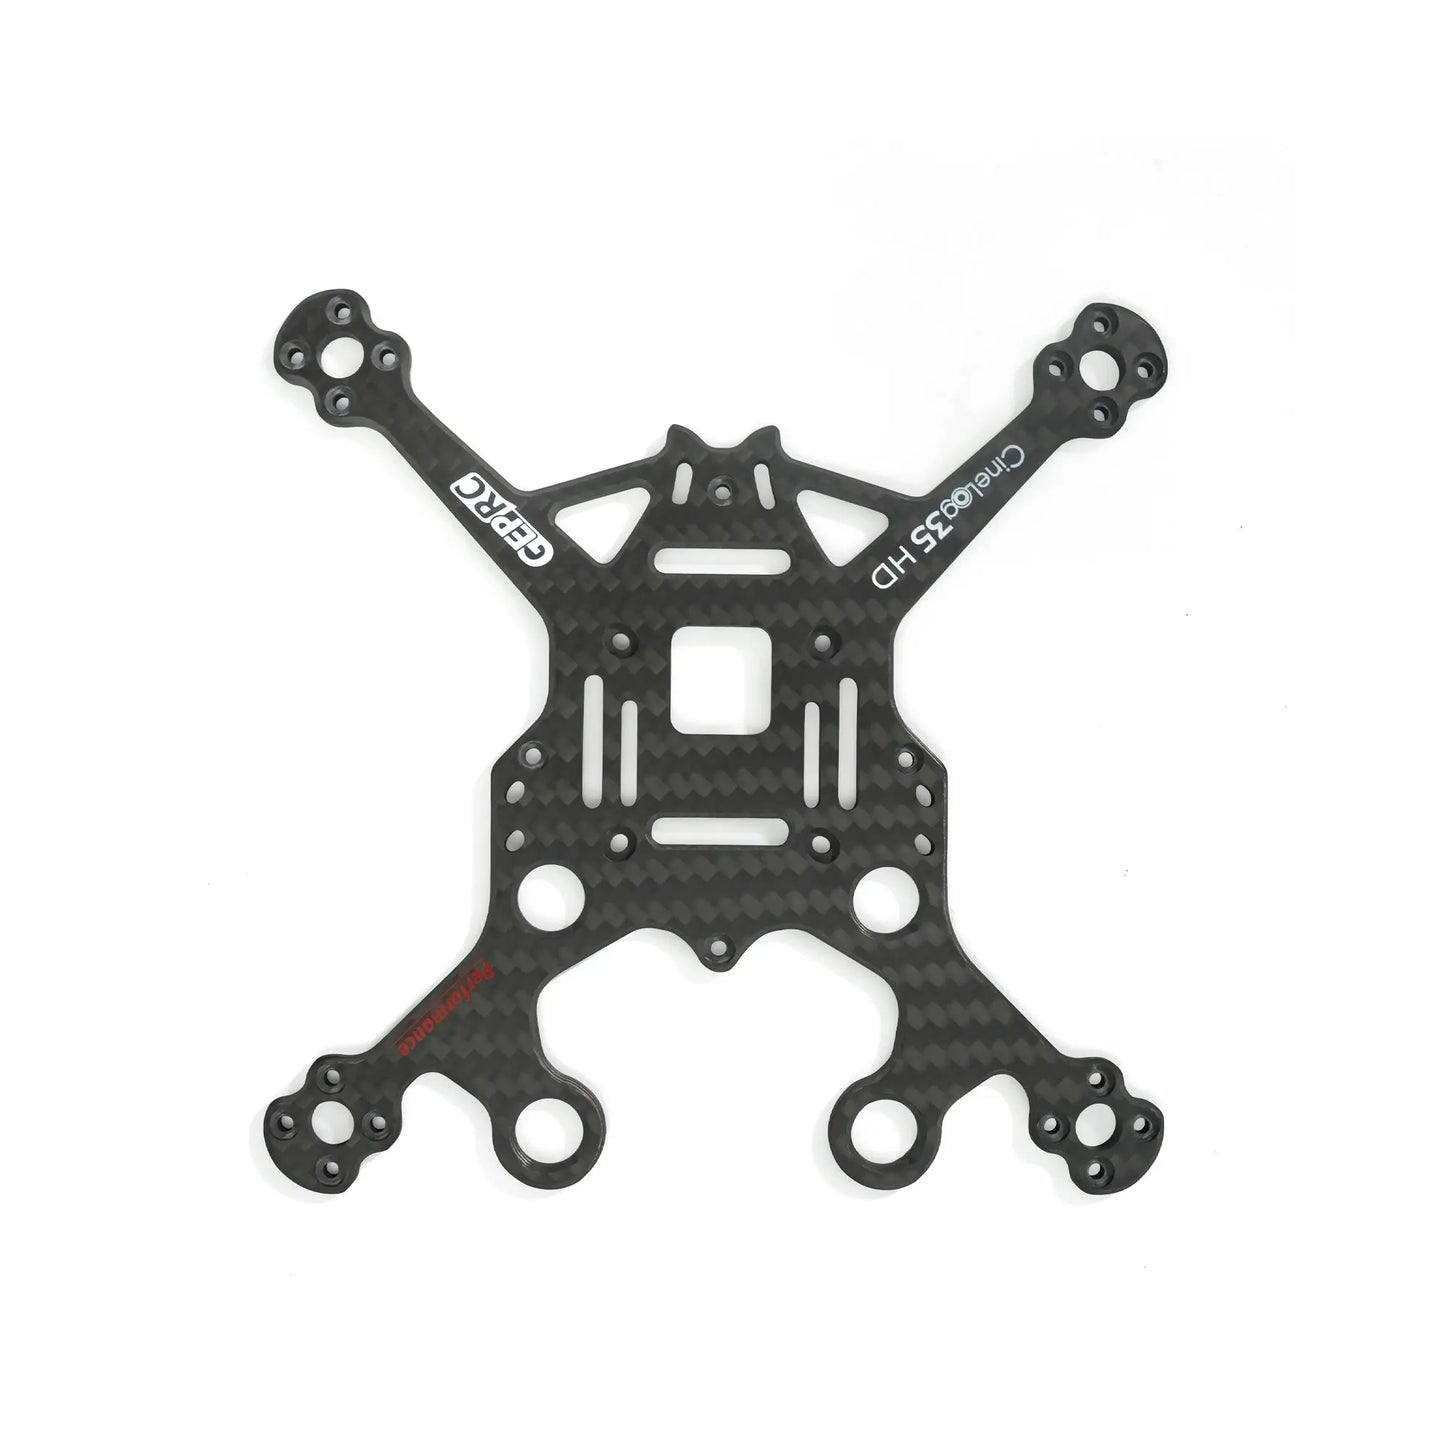 GEP-CL35 Performance Frame/Parts